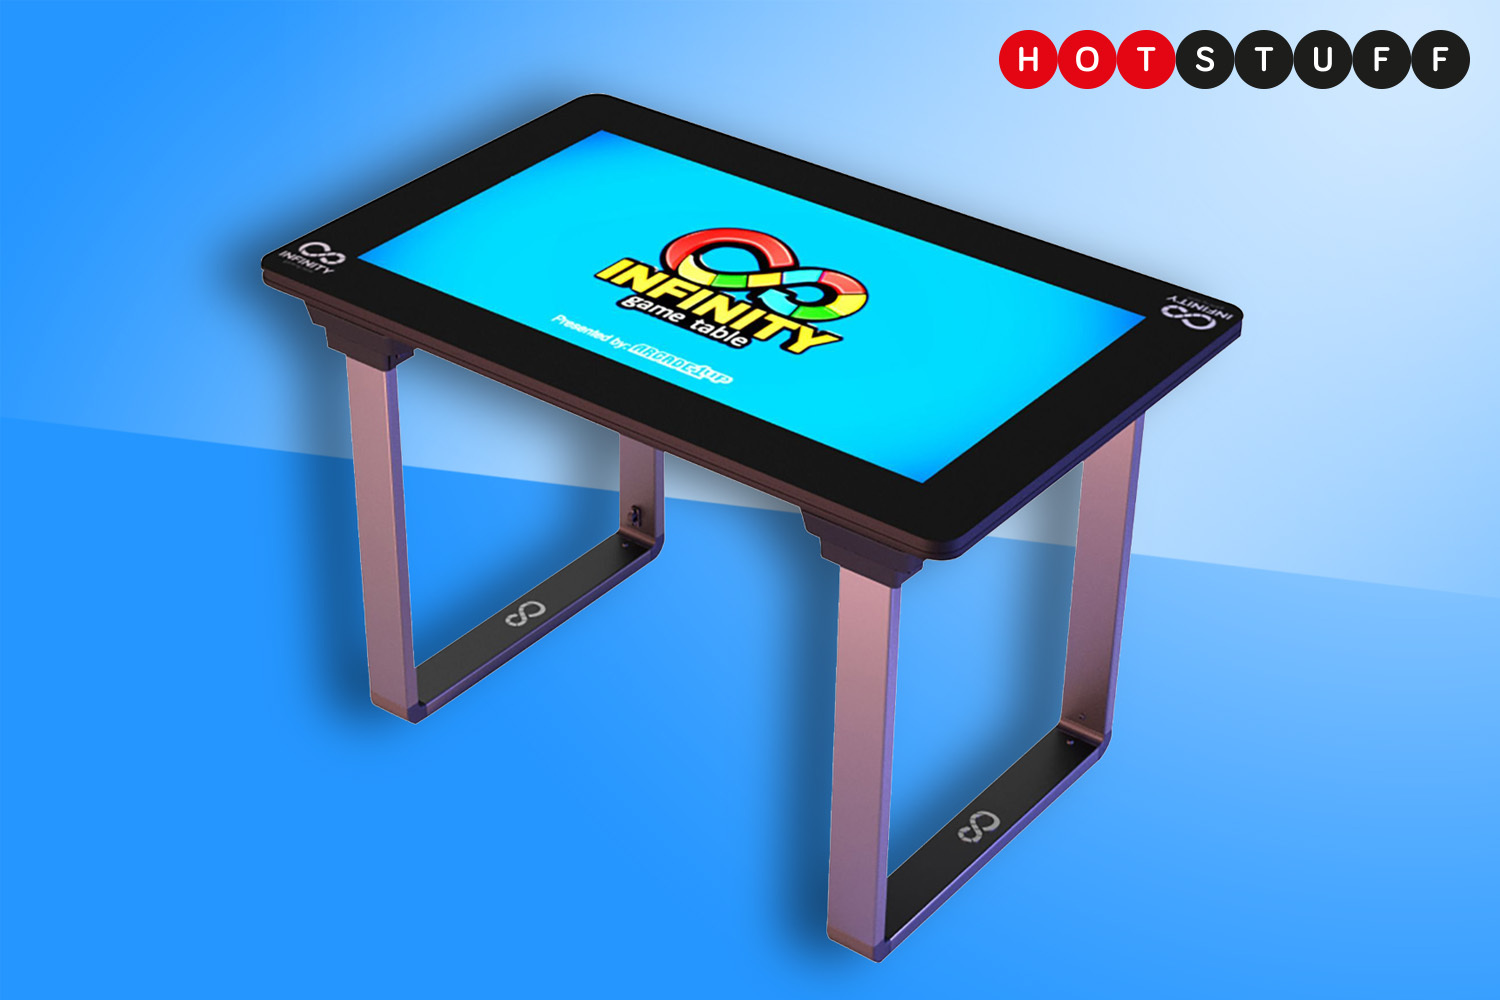 Arcade1Up’s Infinity Game Table puts over 40 board games at your